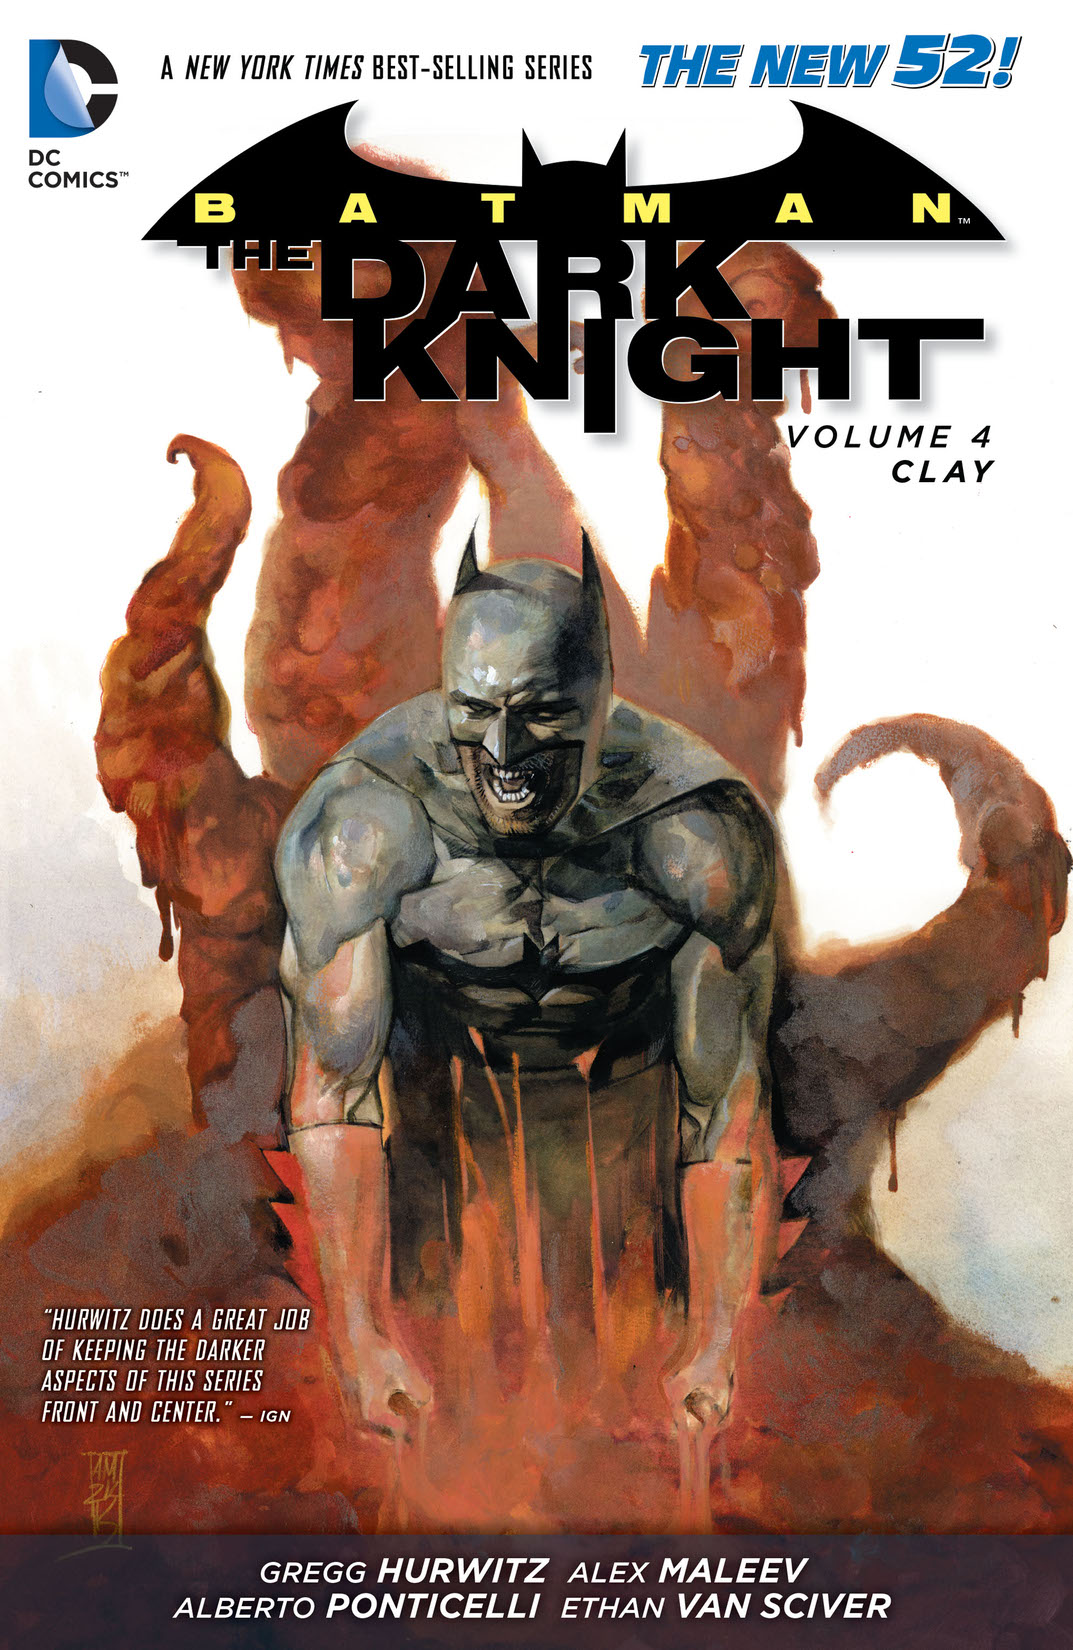 Batman - The Dark Knight Vol. 4: Clay preview images